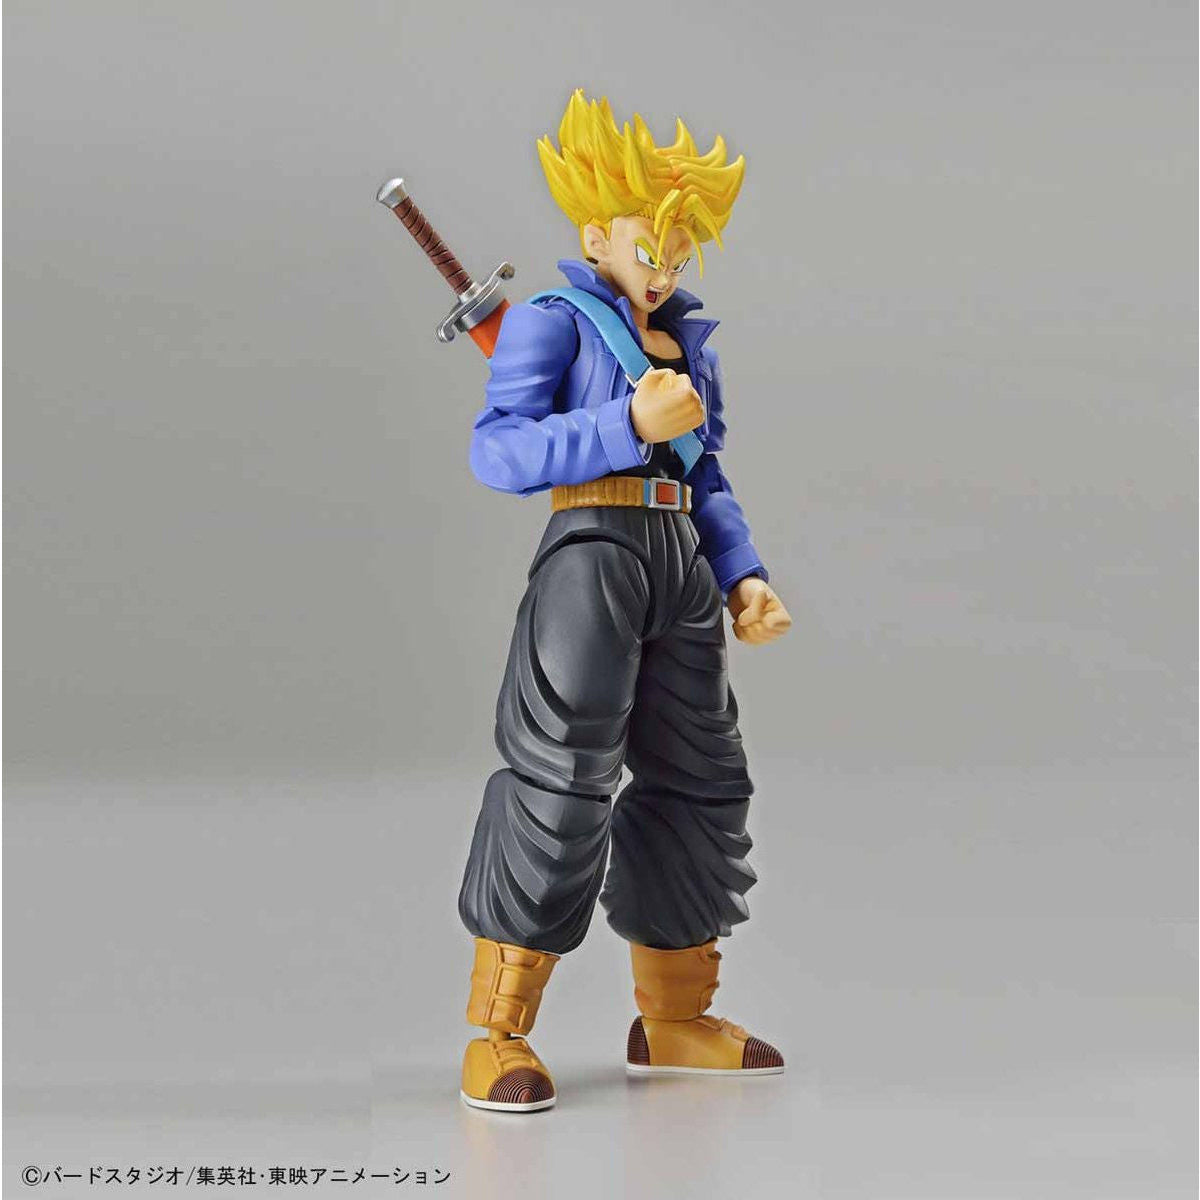 Dragon Ball - Super Saiyan Trunks - Figure-rise Standard Model Kit, Includes two head parts for Trunks in normal and Super Saiyan states, effect parts for Burning Attack and Shining Slash, iconic sword, and various hand parts. Compatible with Figure-rise Mechanics Trunks' Time Machine. From Bandai. Available at Nippon Figures.